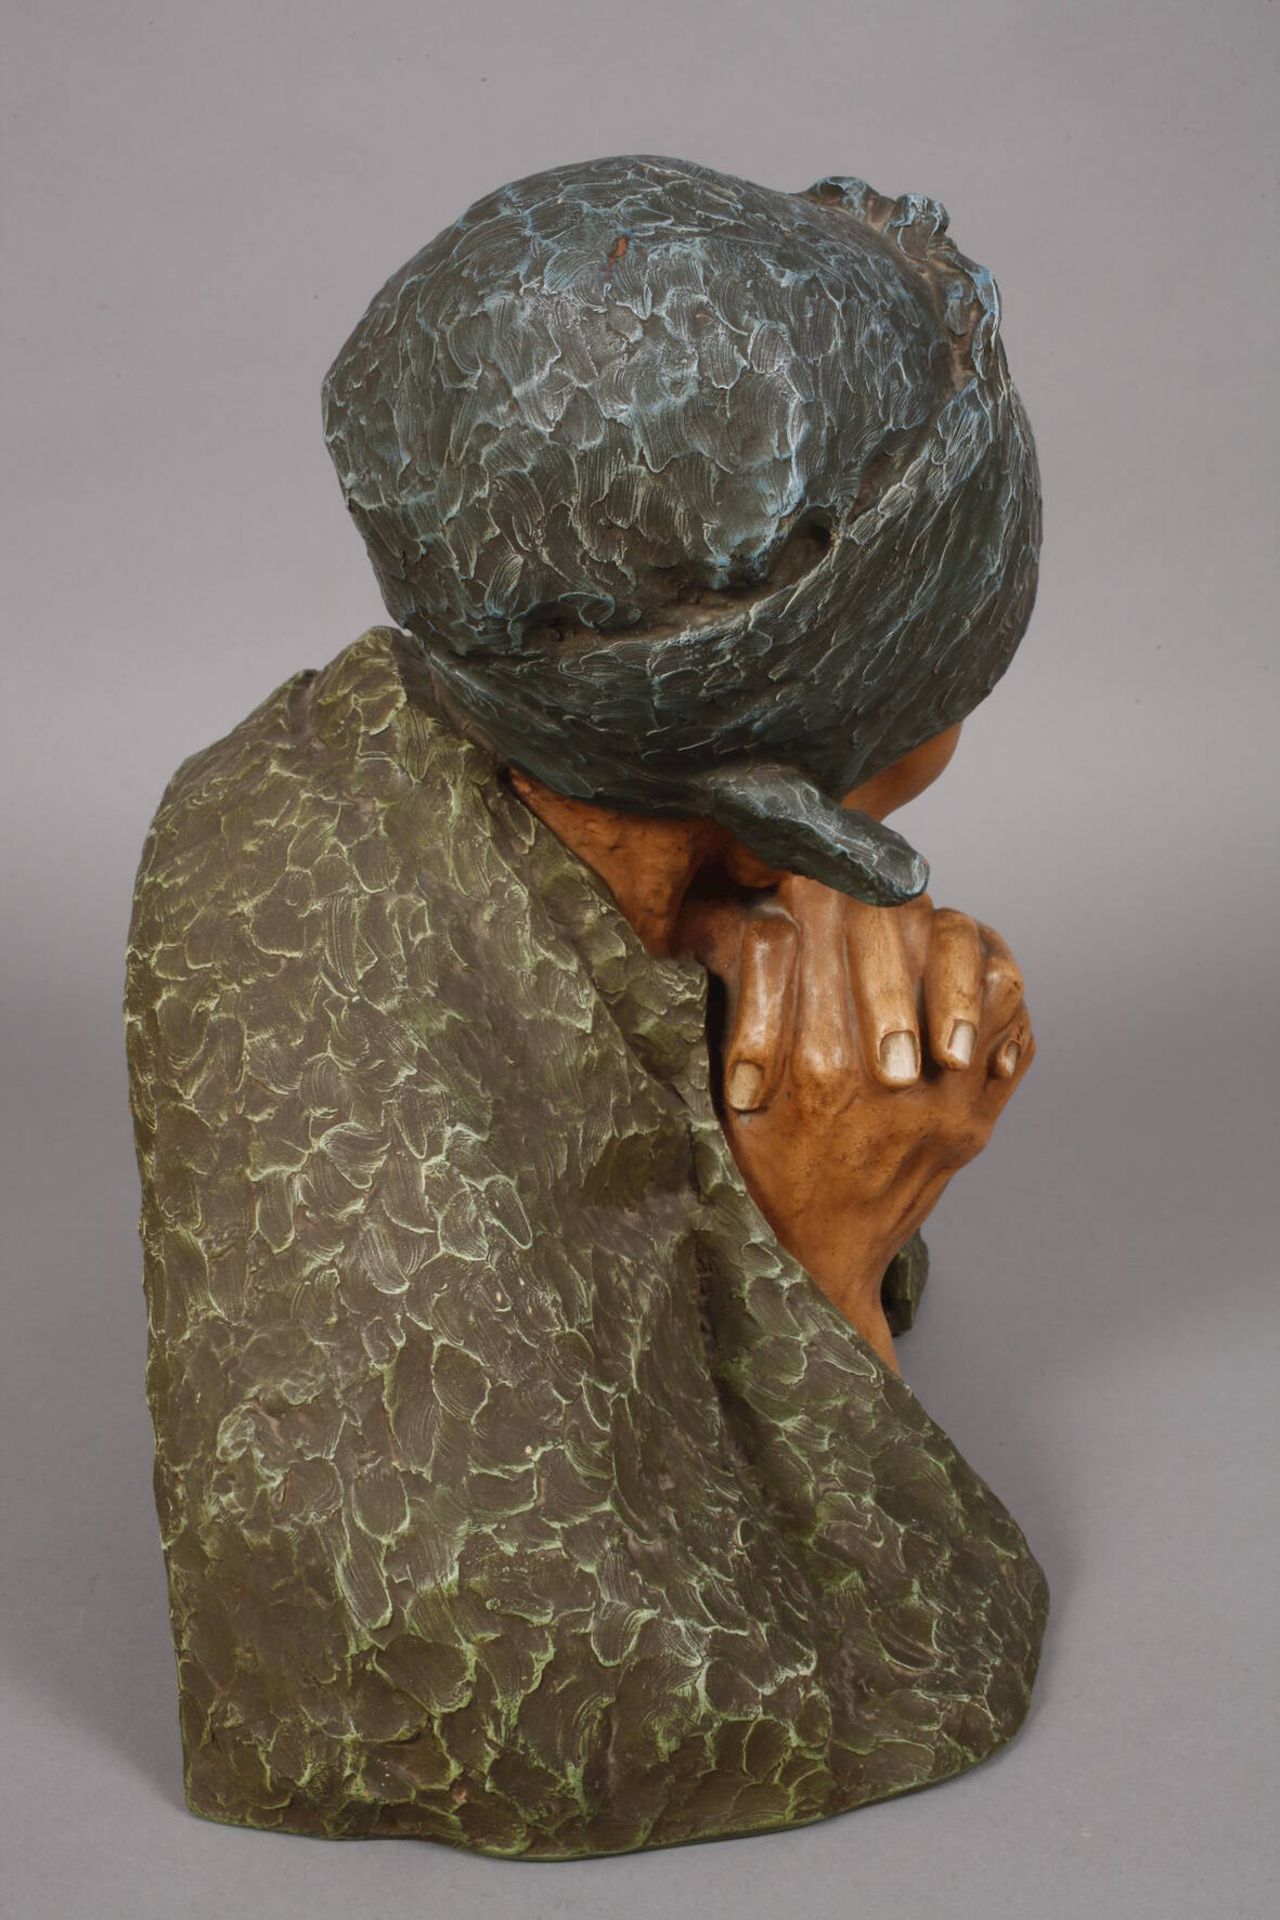 Berthe Girardet terracotta bust "The Old Woman" - Image 3 of 9